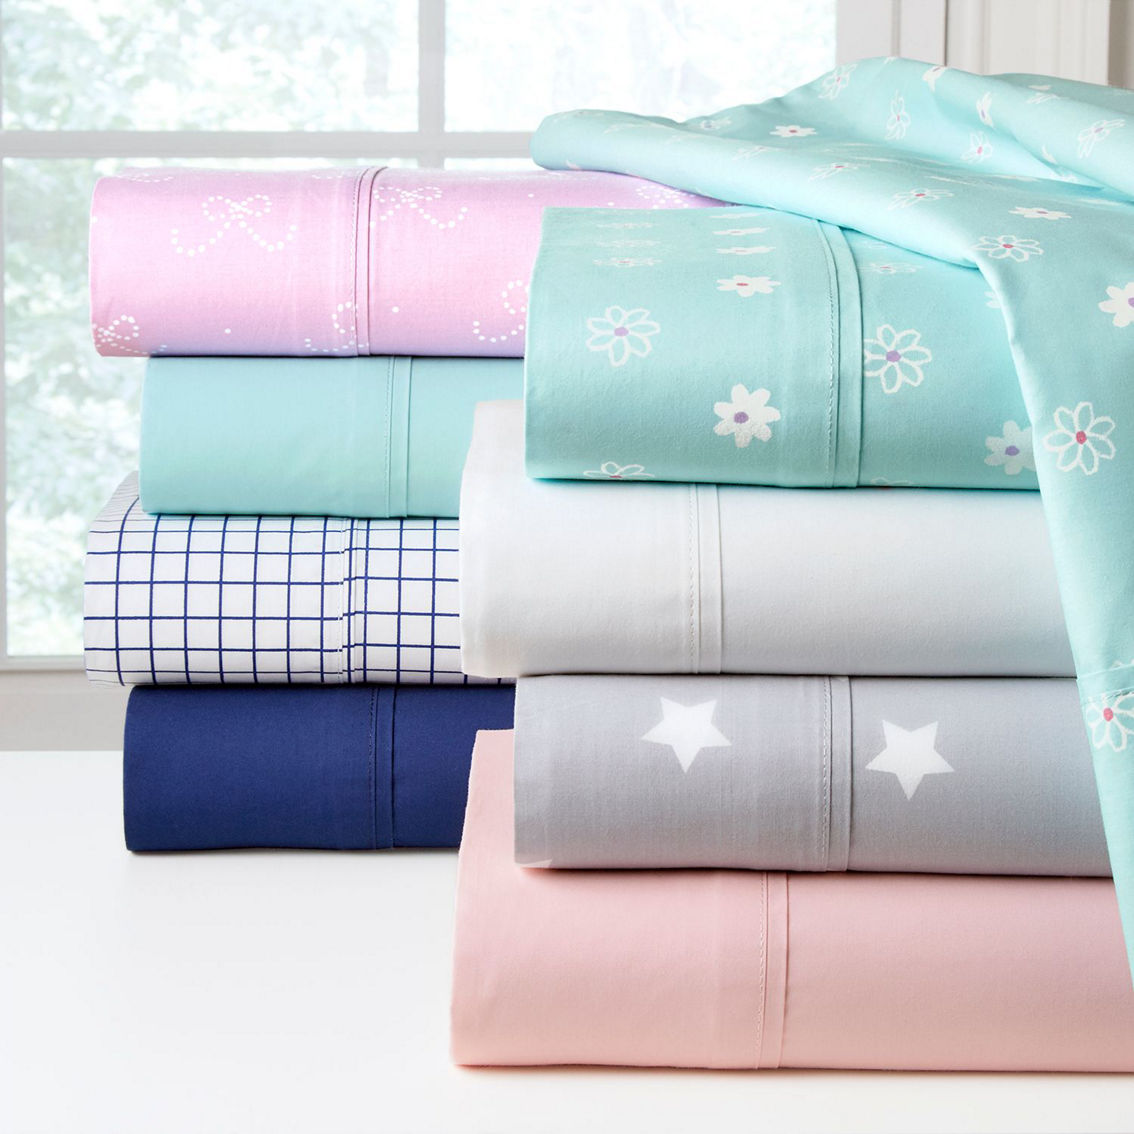 Pointehaven 200 Thread Count 100% Cotton Percale Solid and Print Sheet Sets - Image 3 of 3